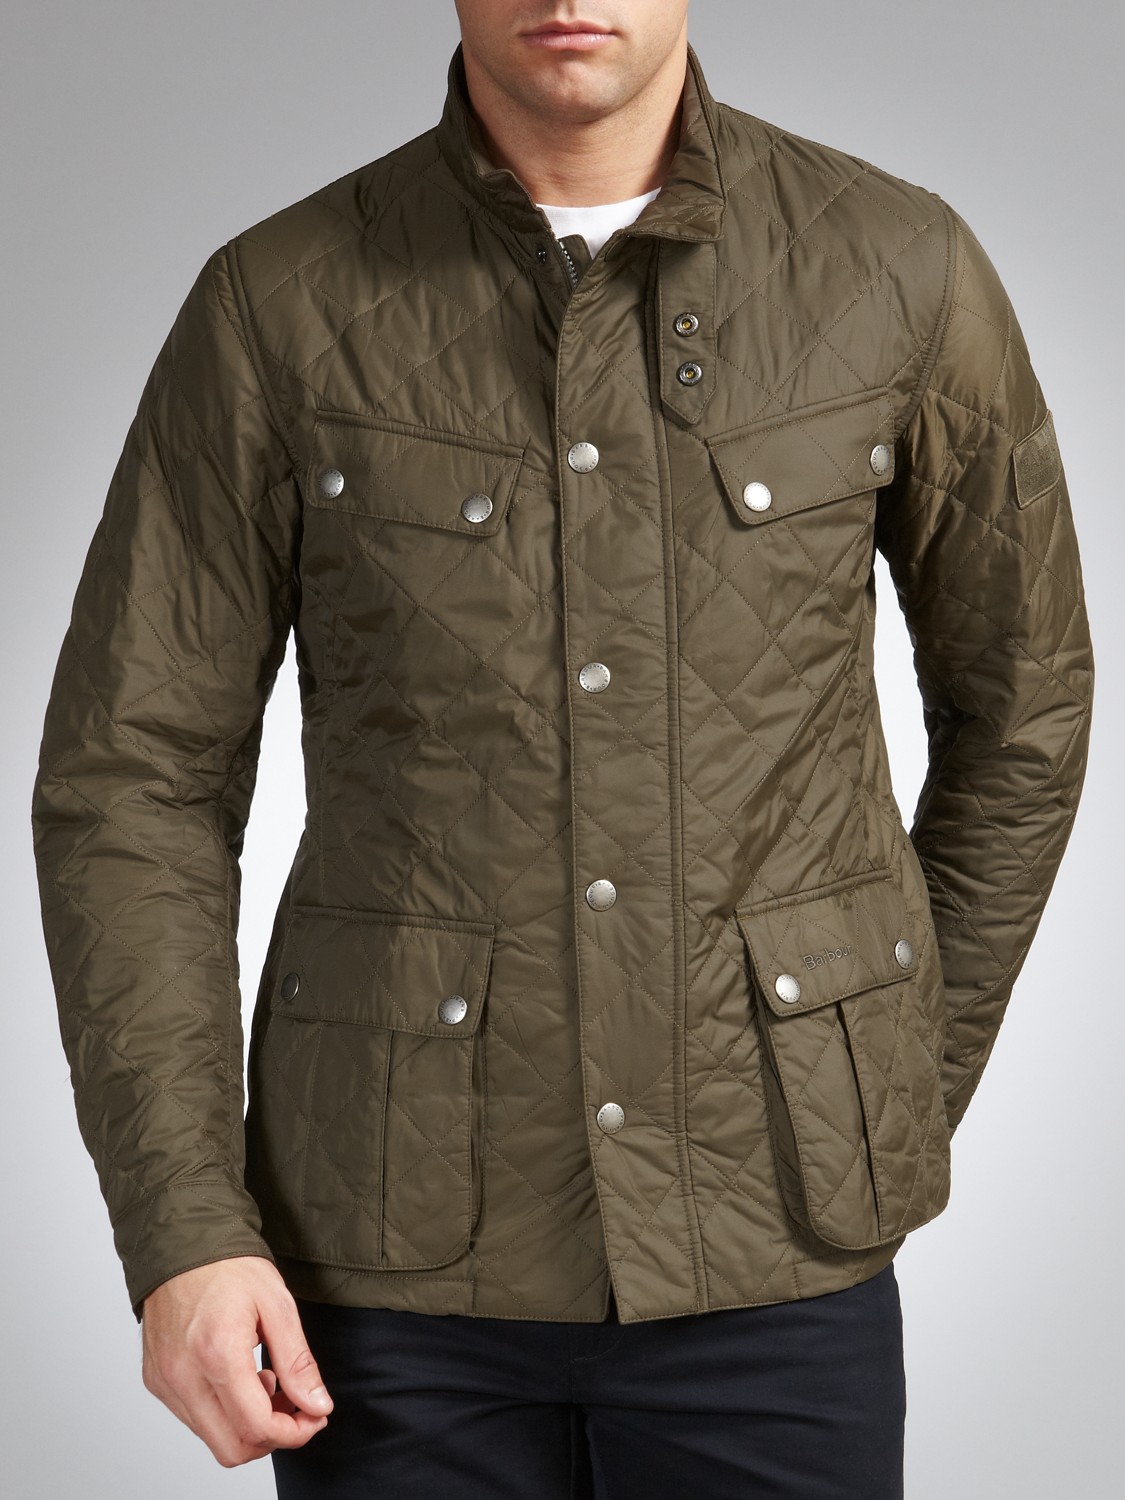 Barbour Ariel Quilted Jacket in Olive (Green) for Men - Lyst